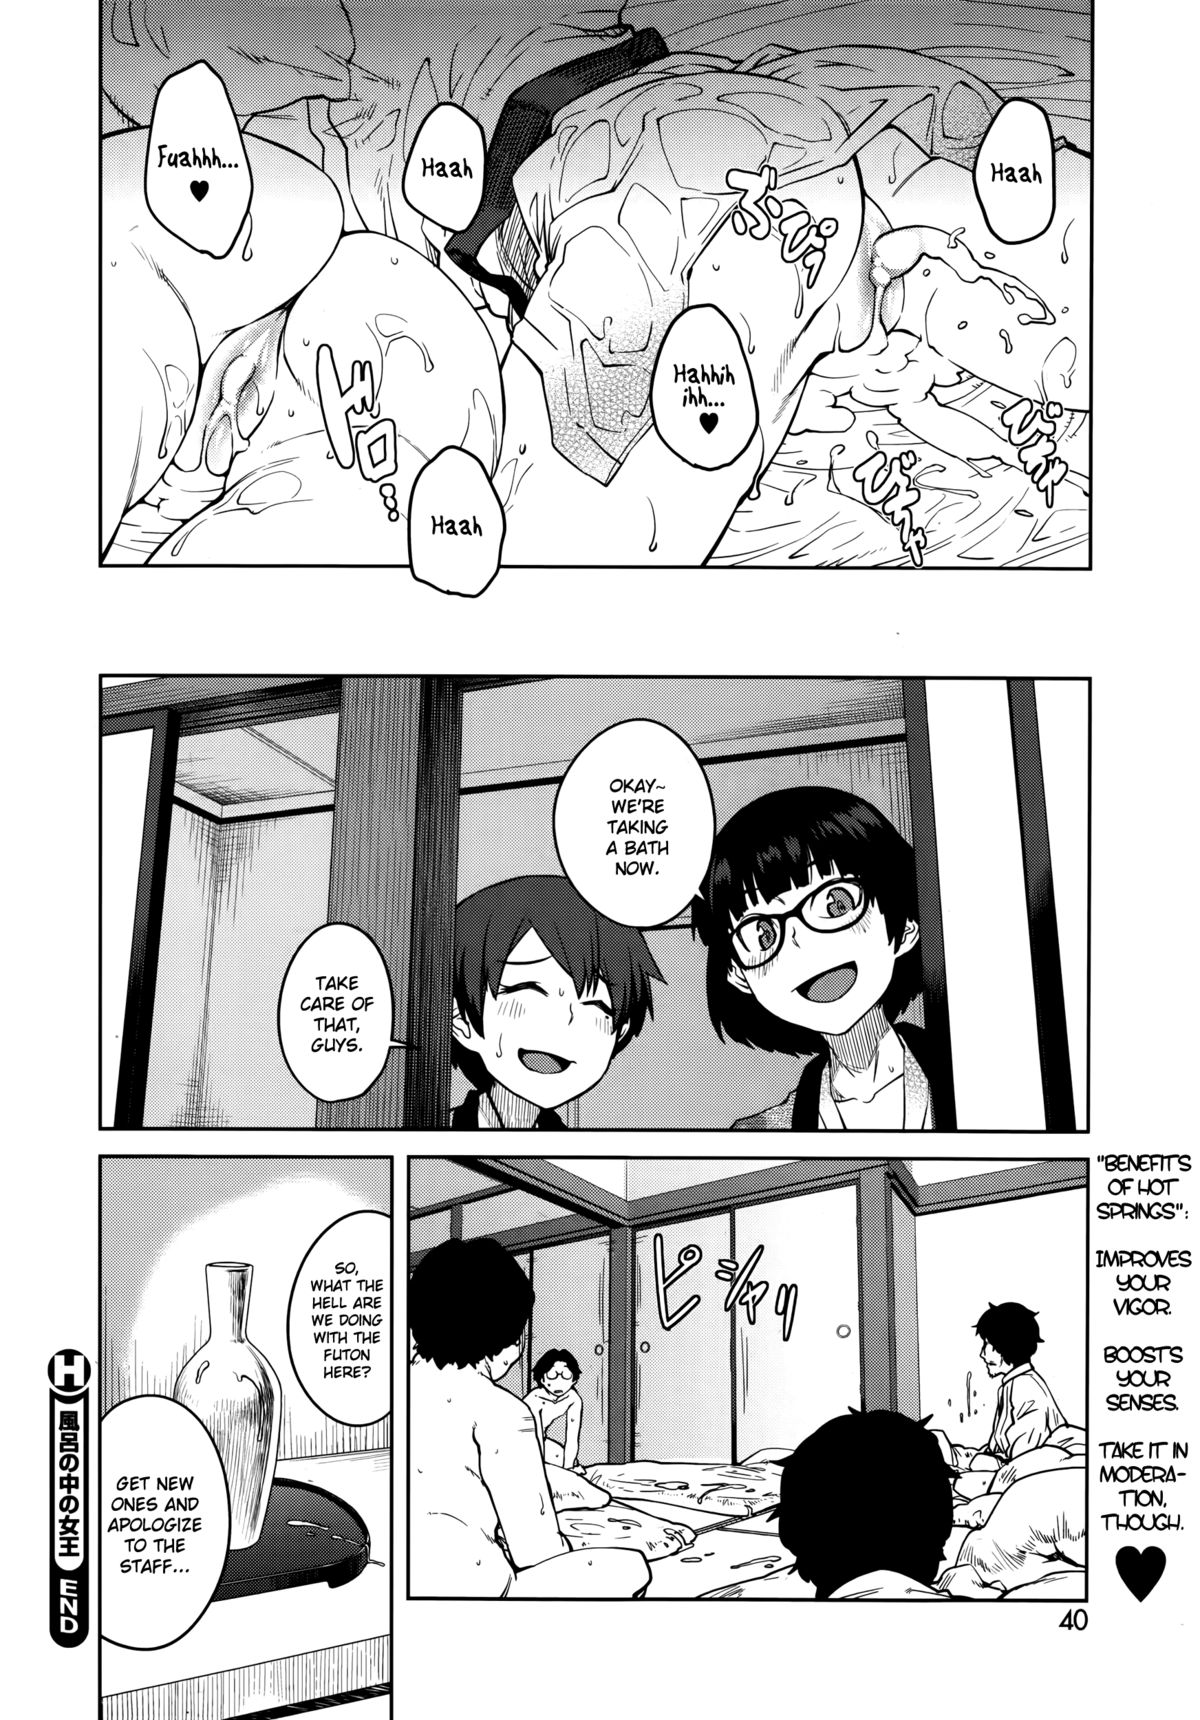 [Shimimaru] Joou Series | Queen Series Ch. 1-3 [English] [Hot Cocoa] page 43 full